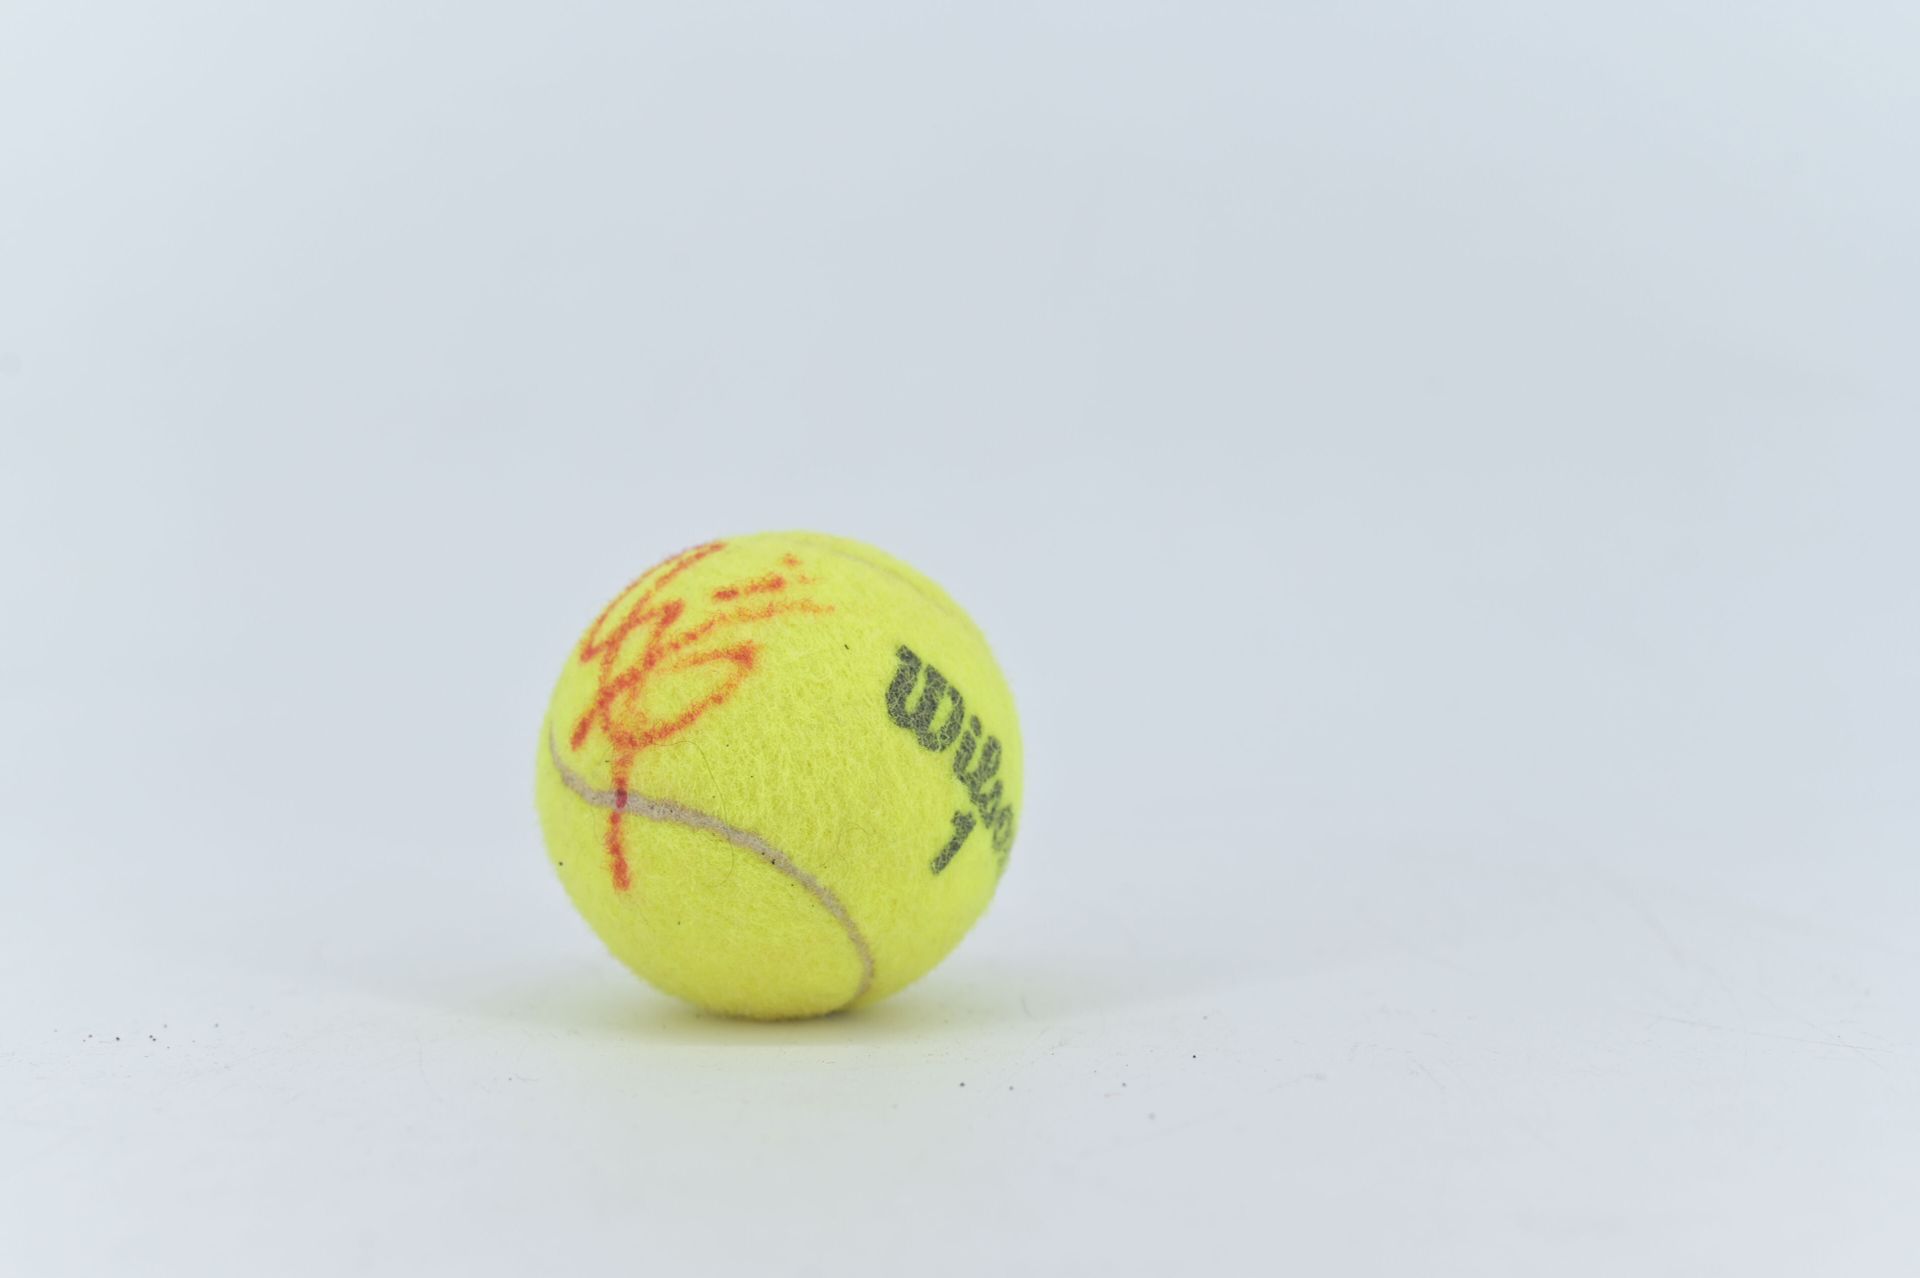 Null A Wilson Roland Garros 2023 ball signed by Gilles Simon 2023

Note:
- Priva&hellip;